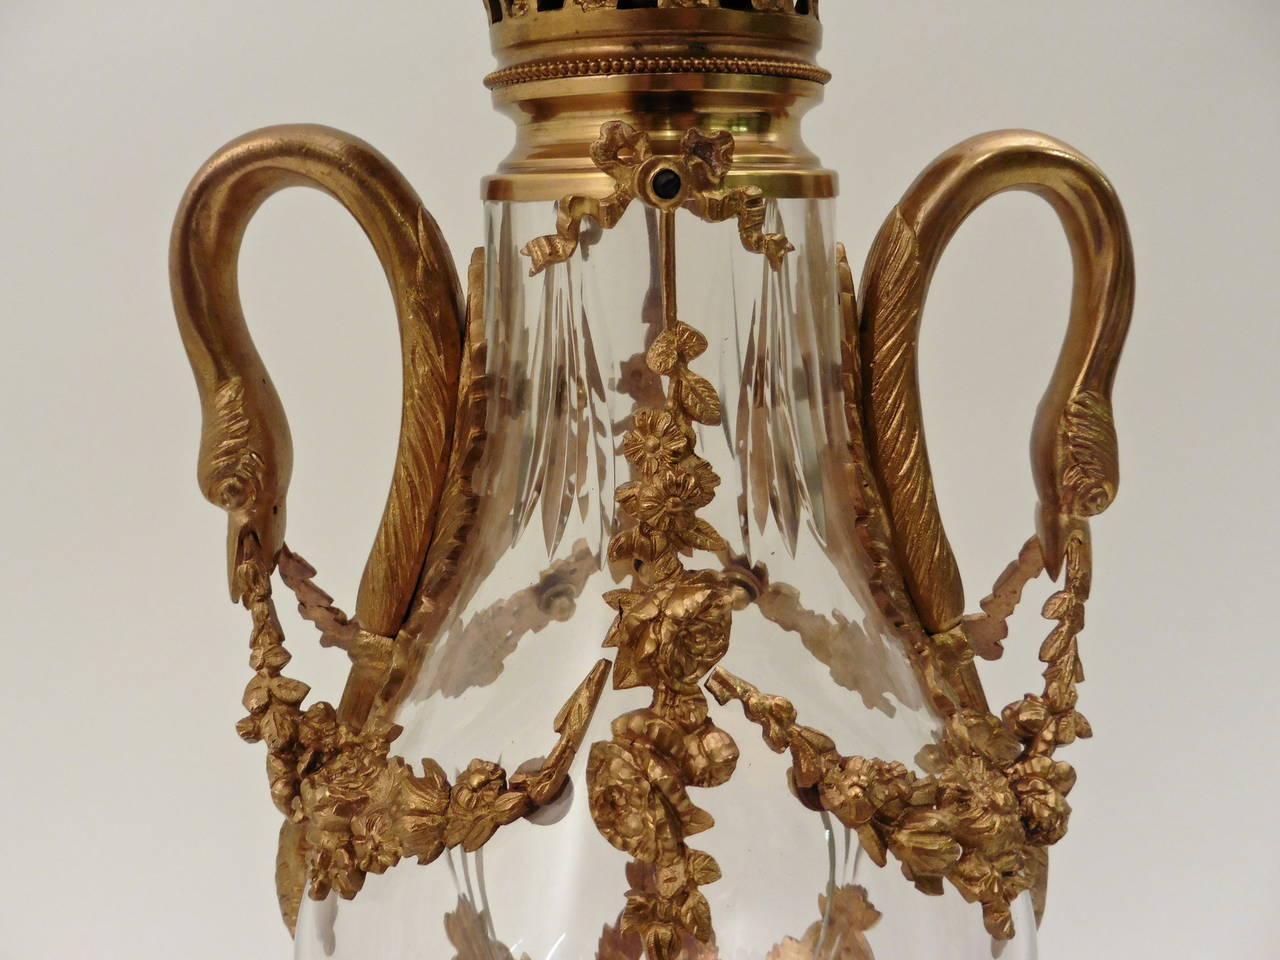 Early 20th Century Pair of French Neoclassical Ormolu-Mounted Crystal Cassolettes, circa 1900